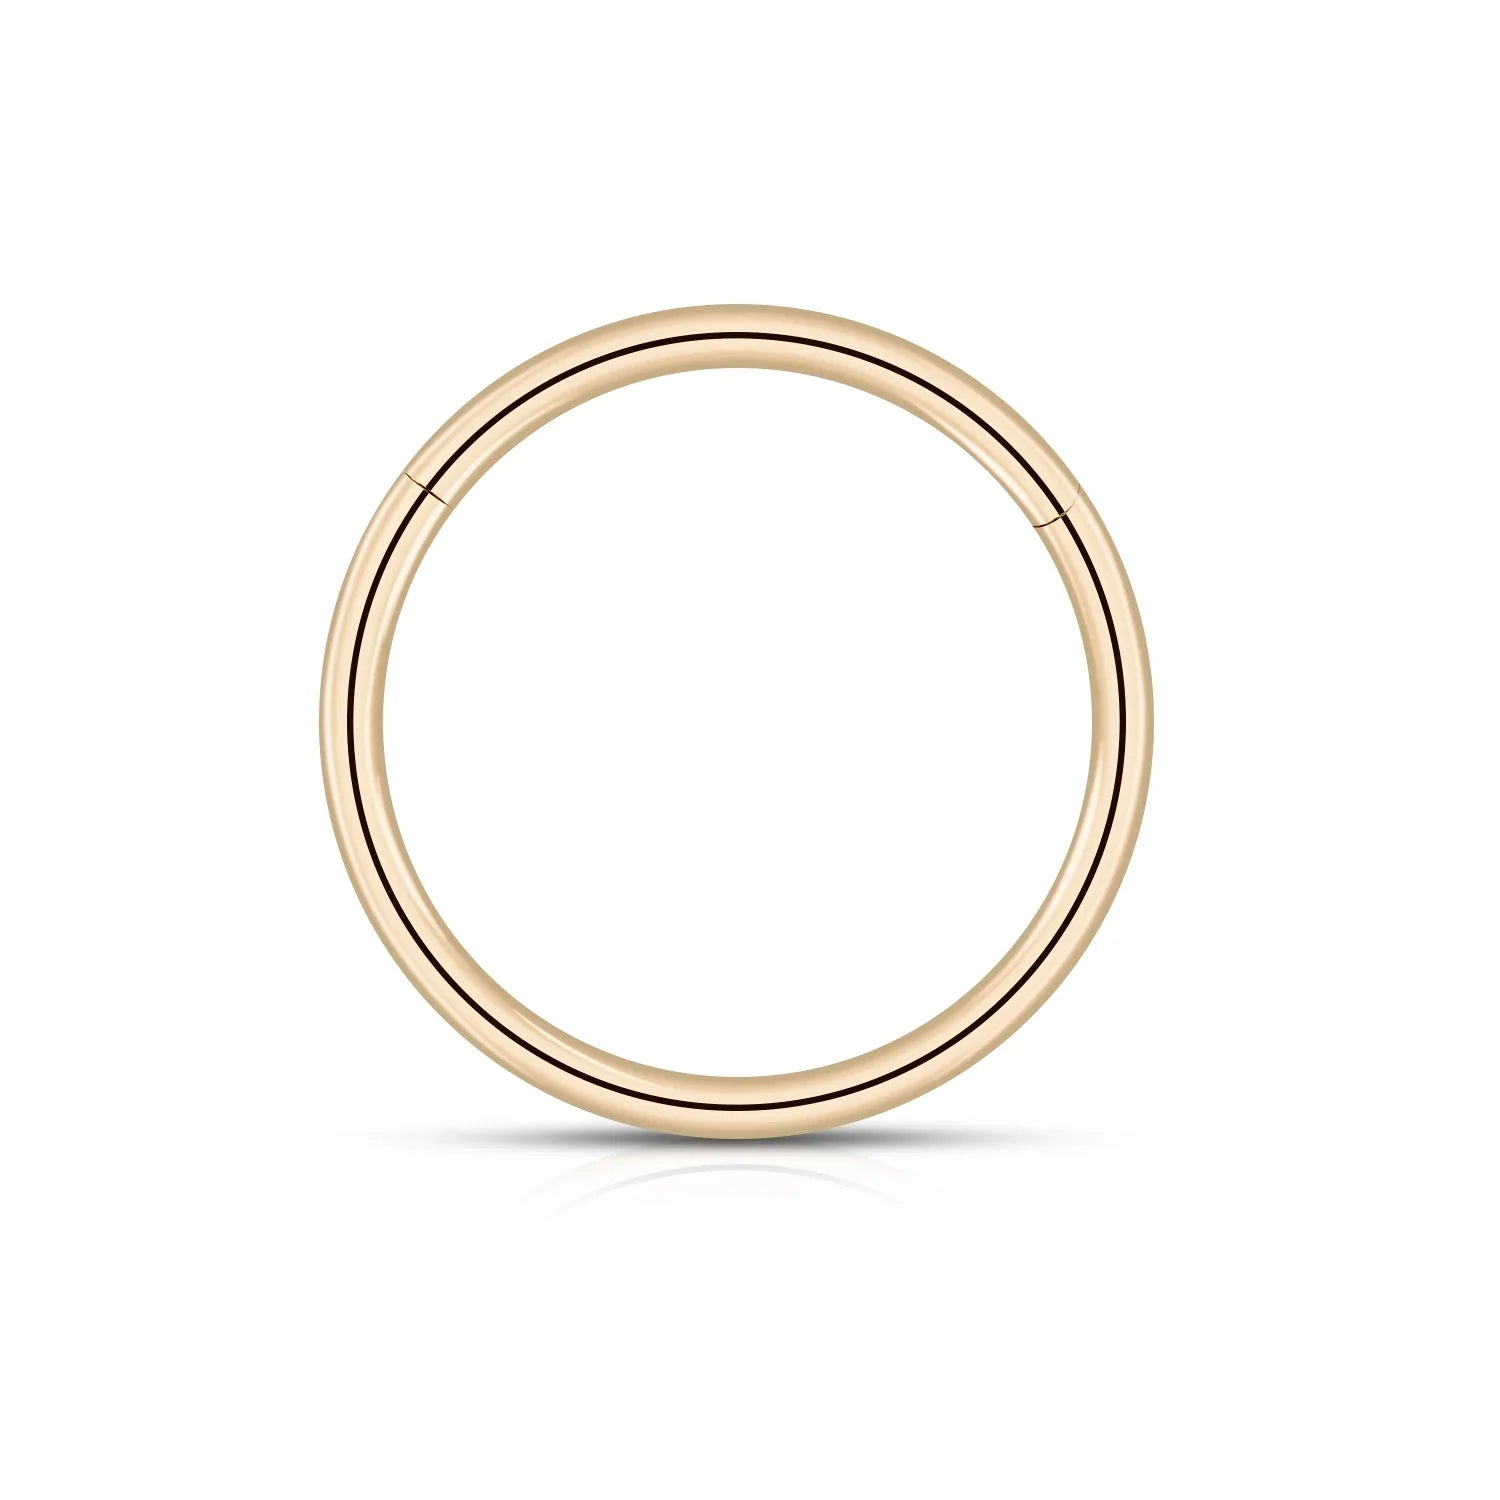 14K gold nose hoop nose clicker ring septum ring solid gold ear piercing Ashley Piercing Jewelry